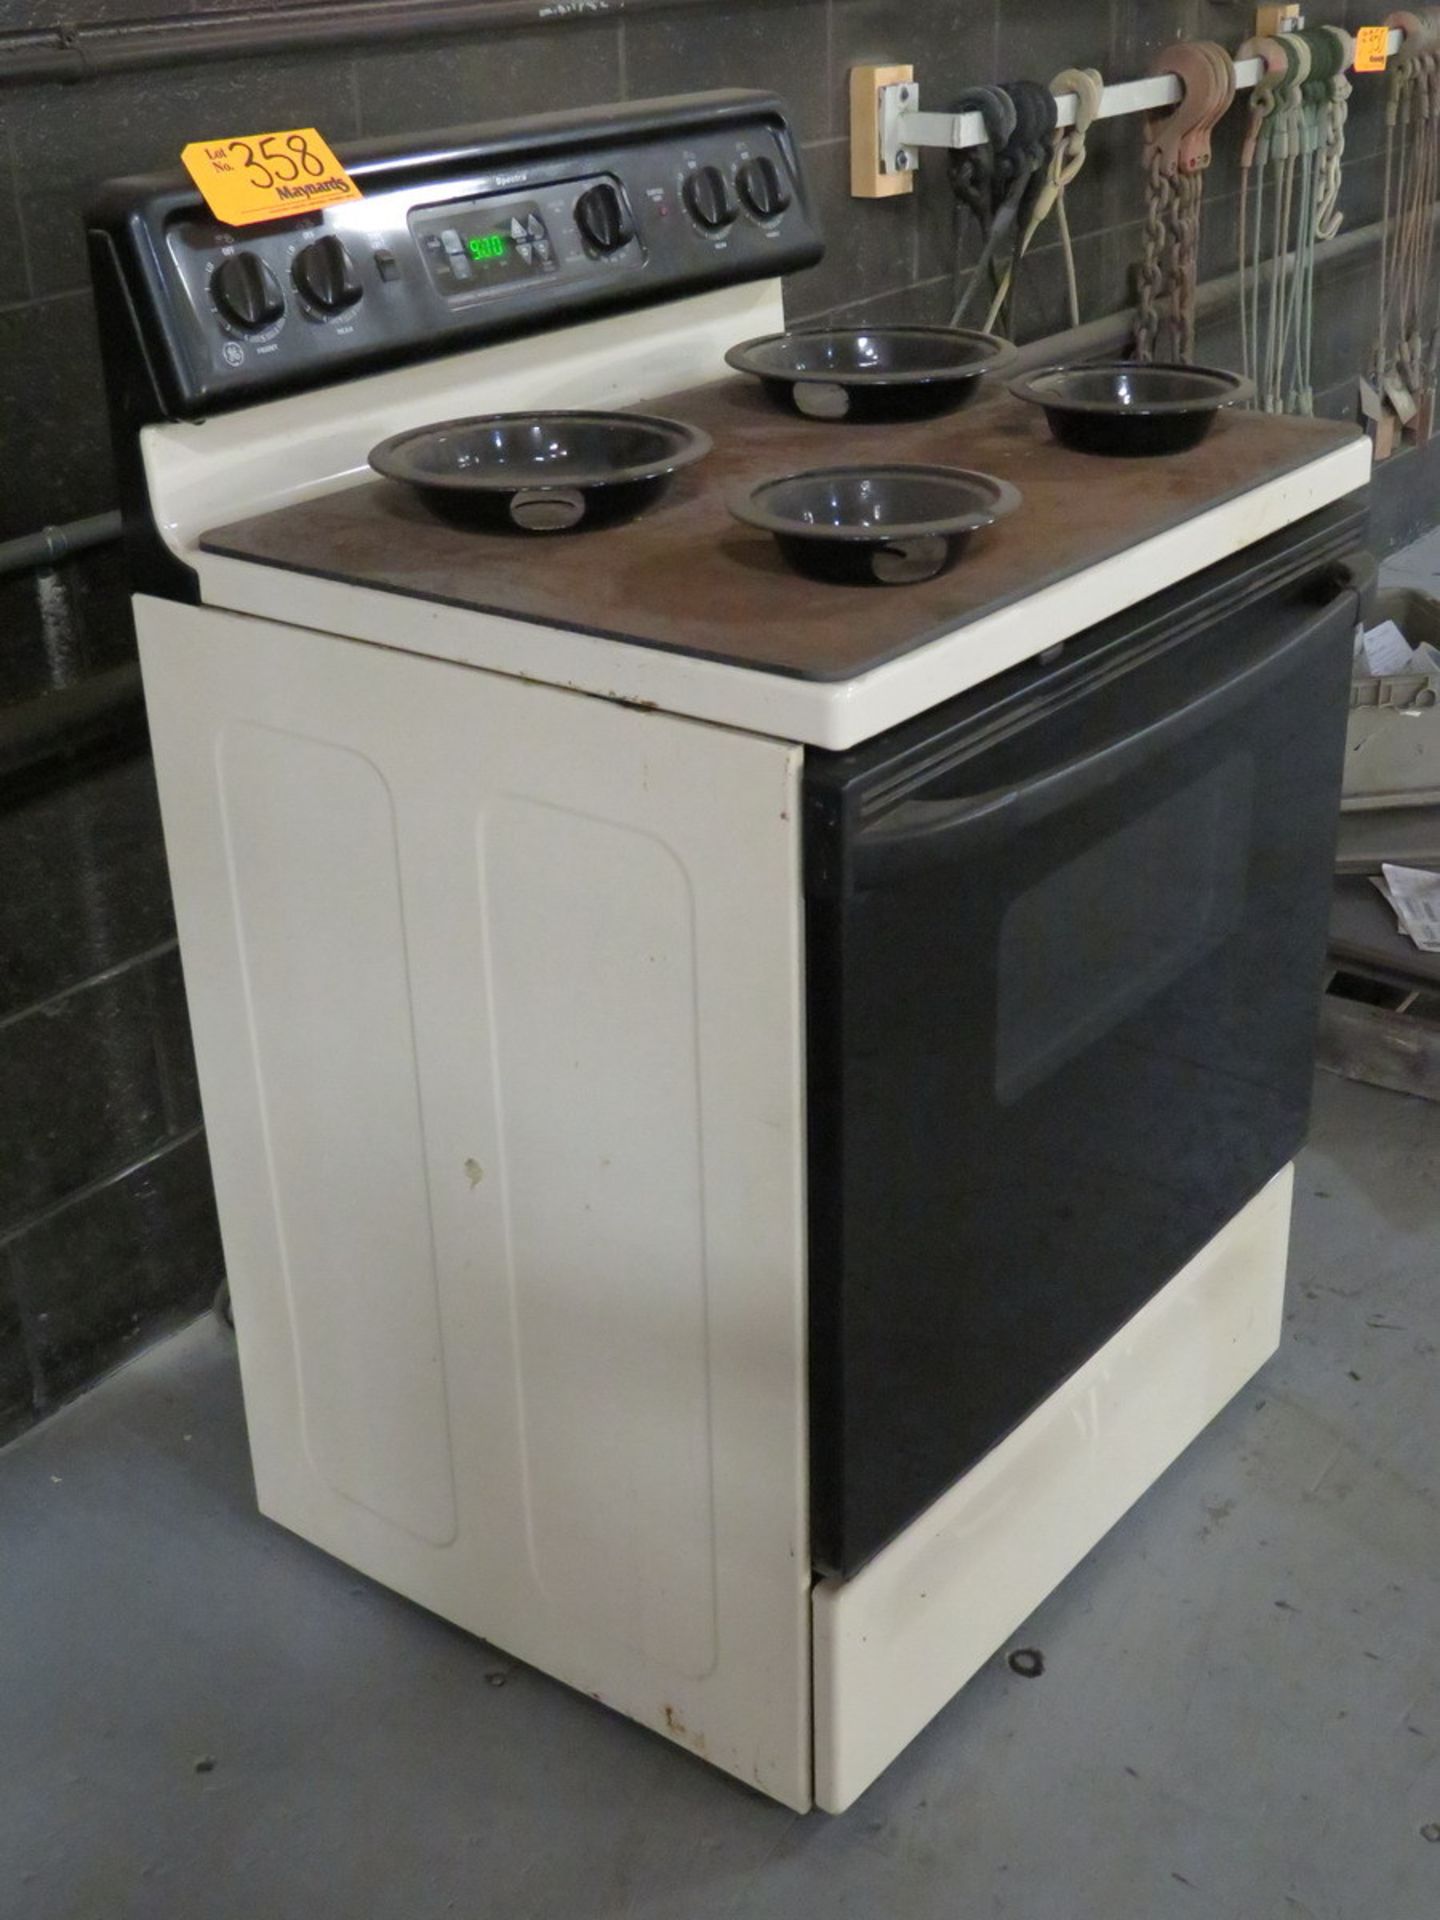 GE Spectra Electric Range with Oven - Image 3 of 5